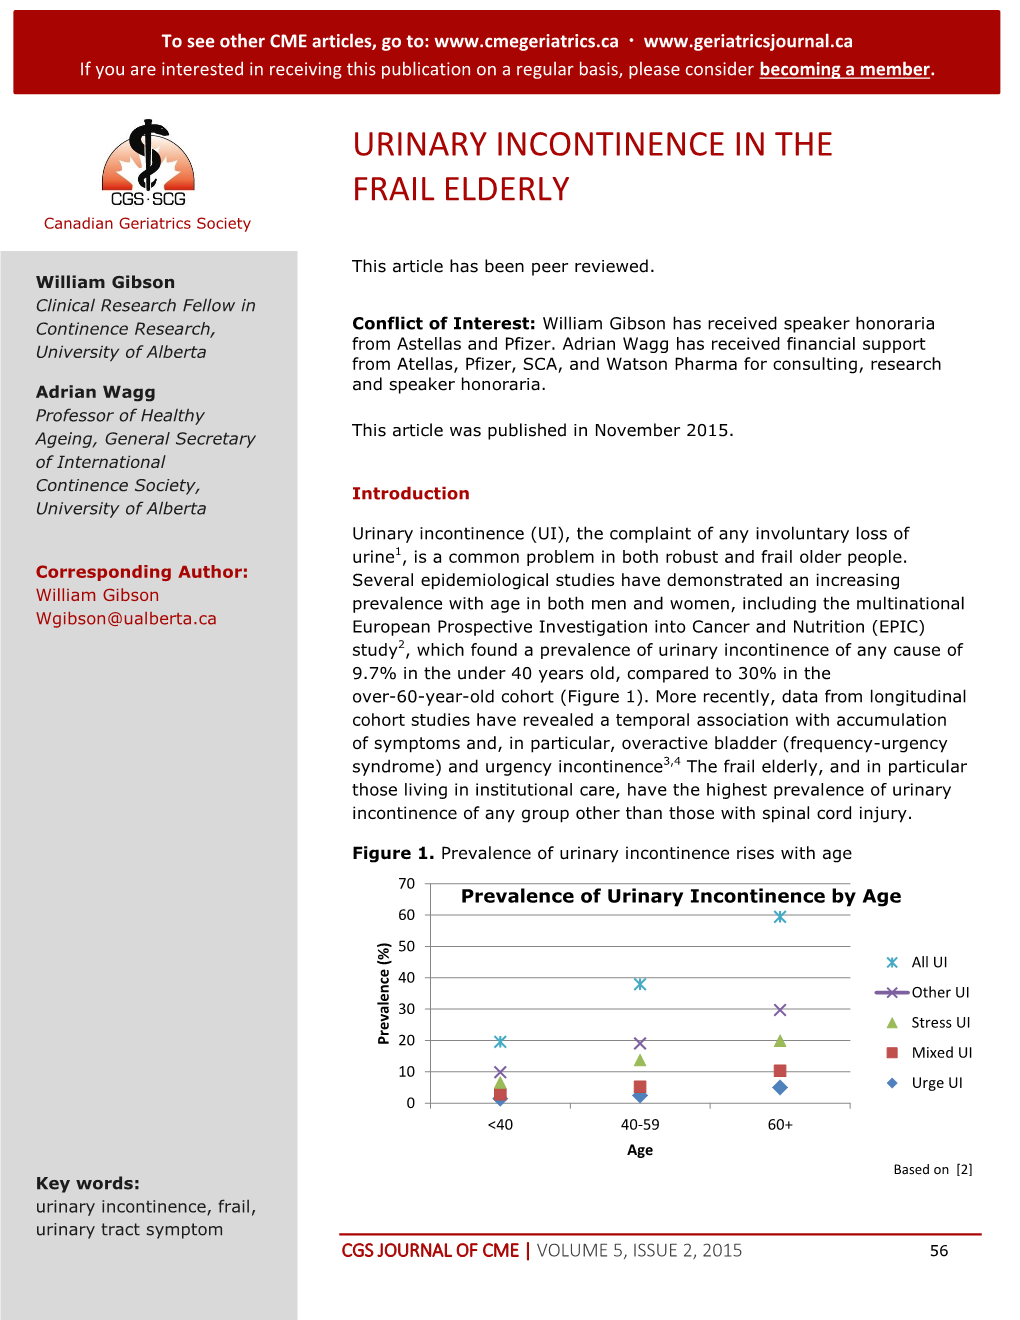 Urinary Incontinence in the Frail Elderly